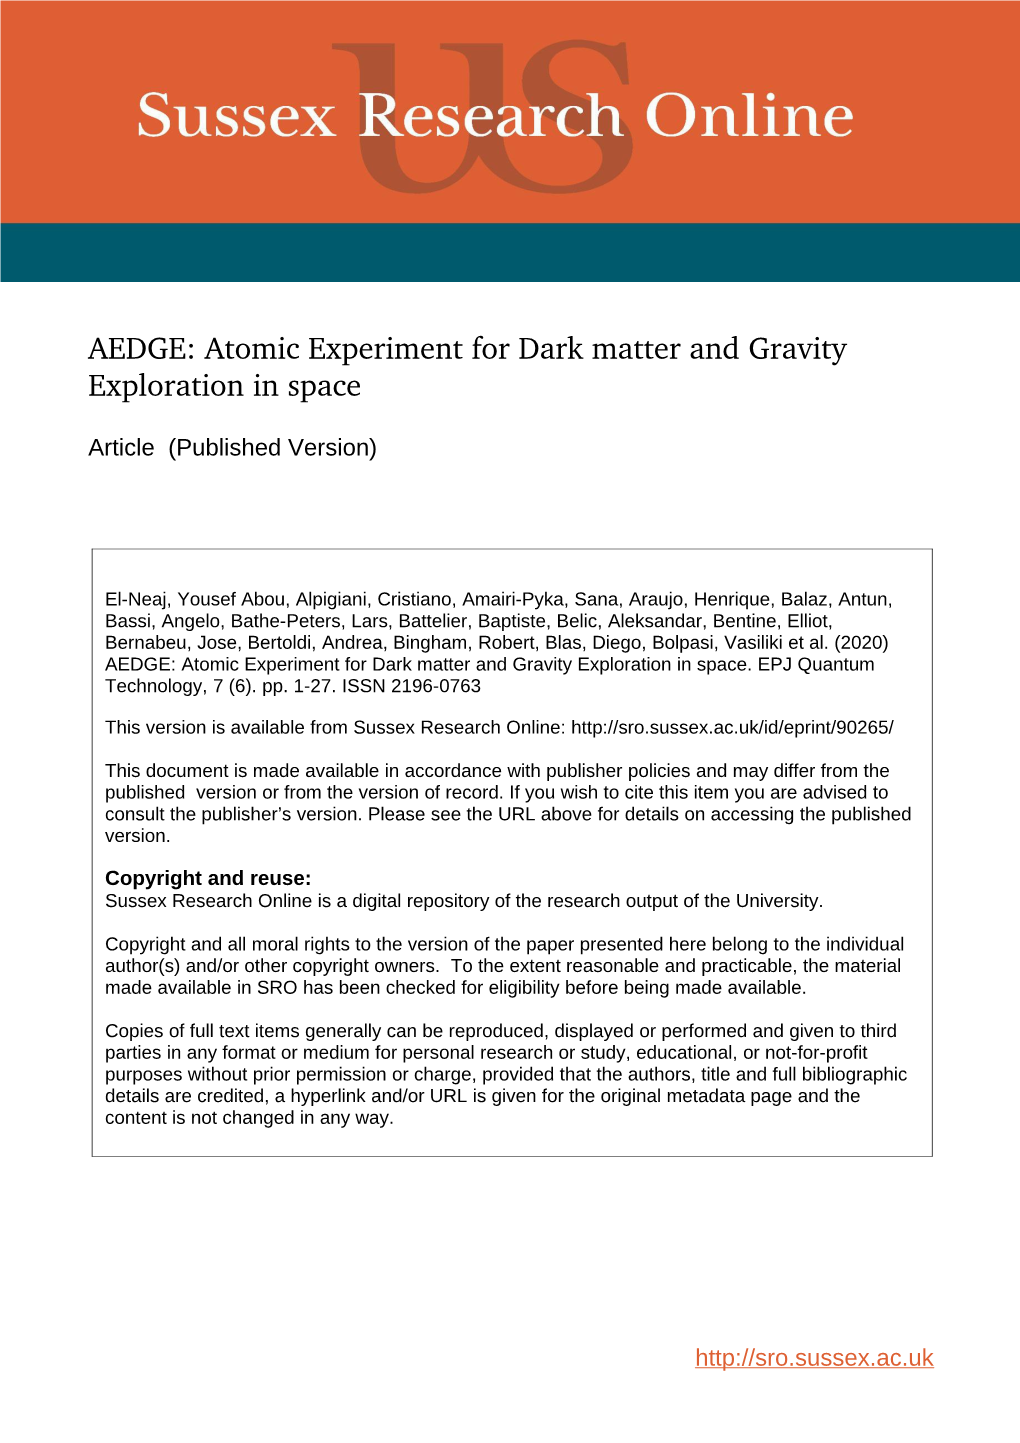 AEDGE: Atomic Experiment for Dark Matter and Gravity Exploration in Space